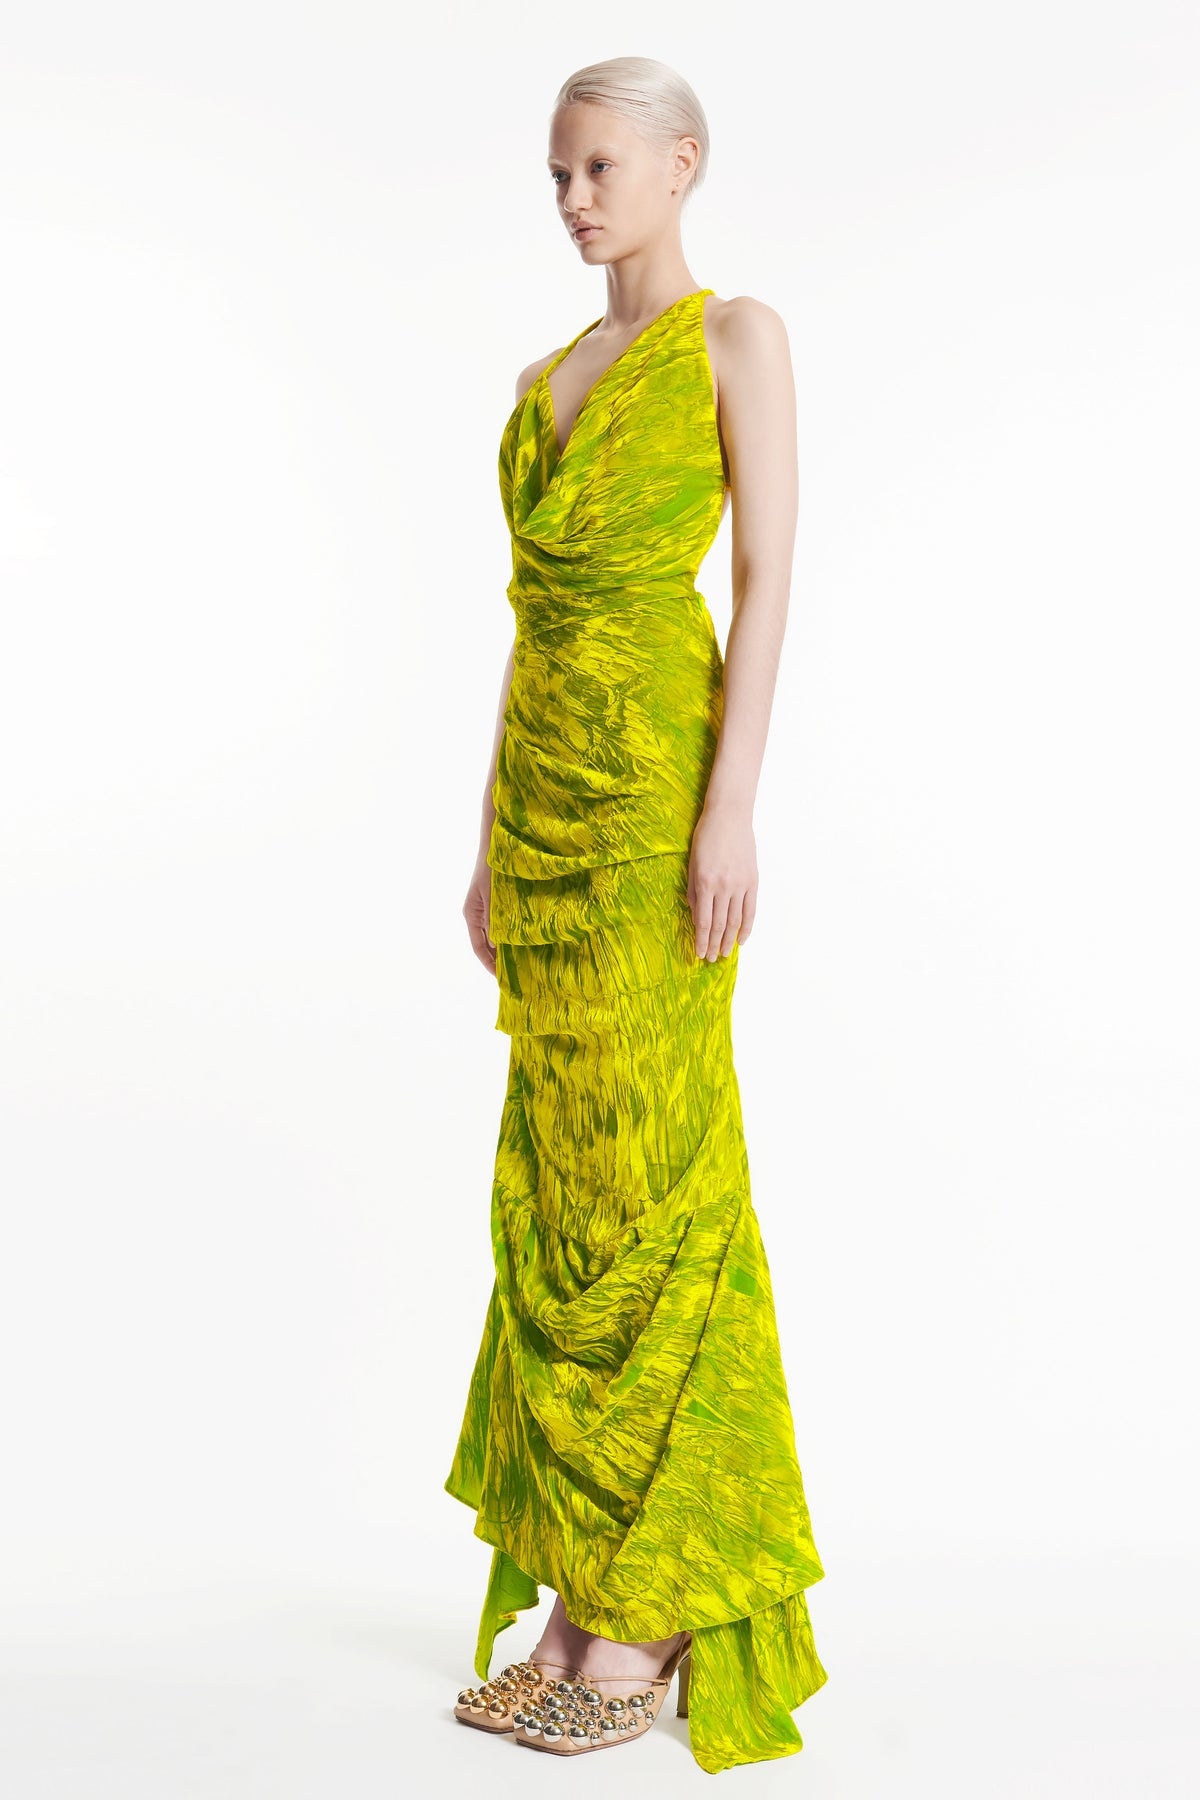 FITTED ASYMMETRIC DRAPED DRESS CITRON - 2